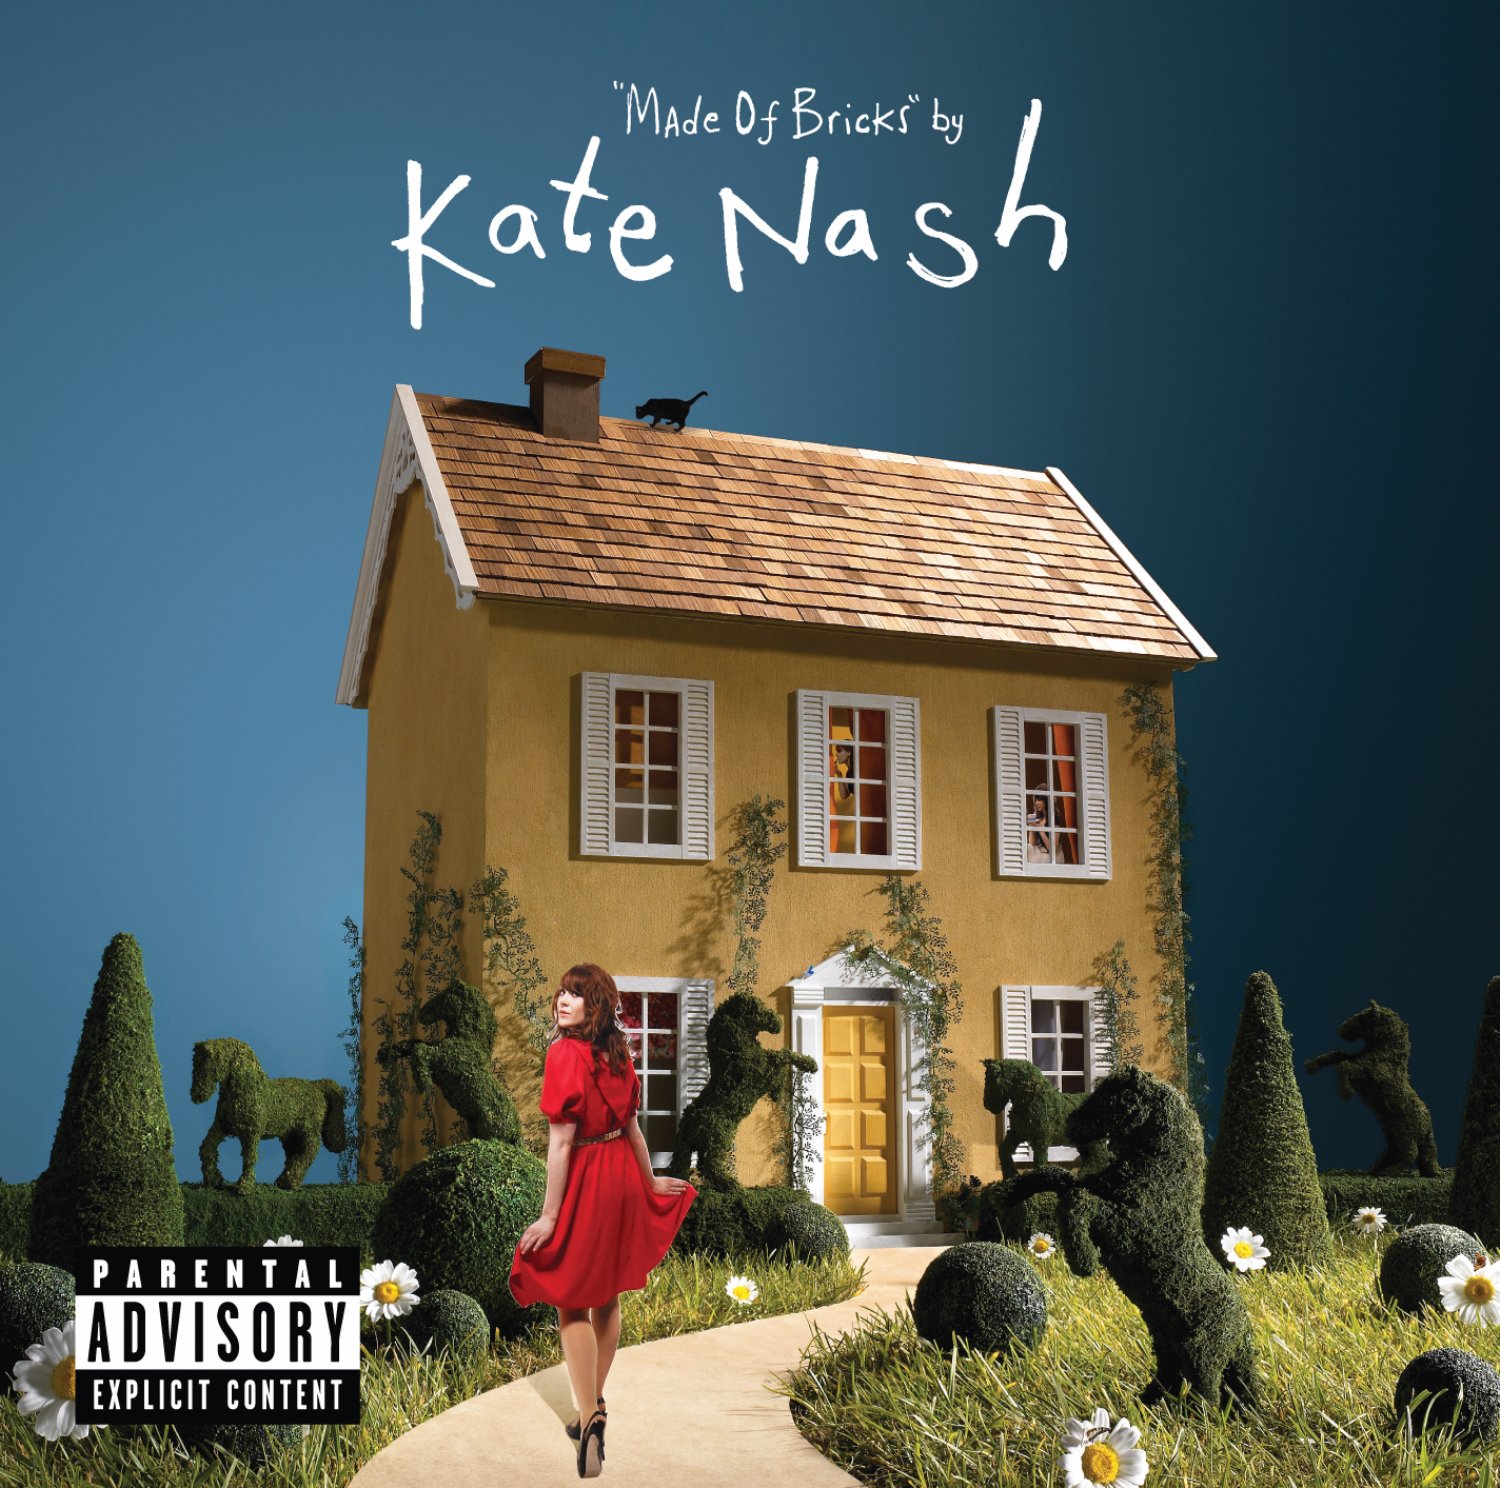 British-born Kate Nashs newest pop record, Made of Bricks was released on Jan. 8, 2008. Her music is finding its way to American ears with its clever lyrics and bouncy, happy pop melodies.